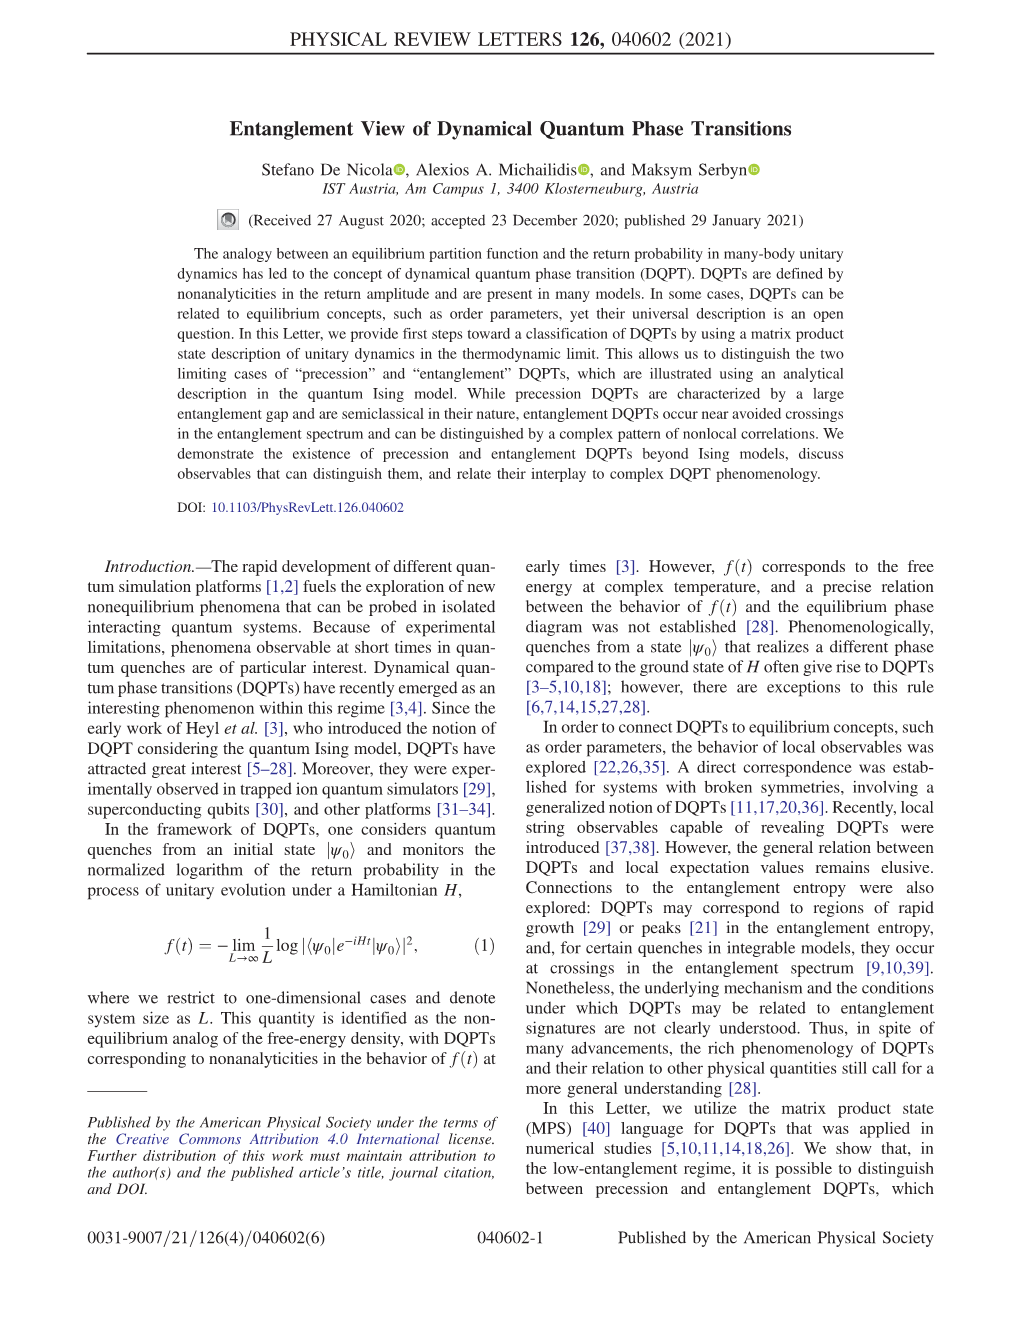 Entanglement View of Dynamical Quantum Phase Transitions